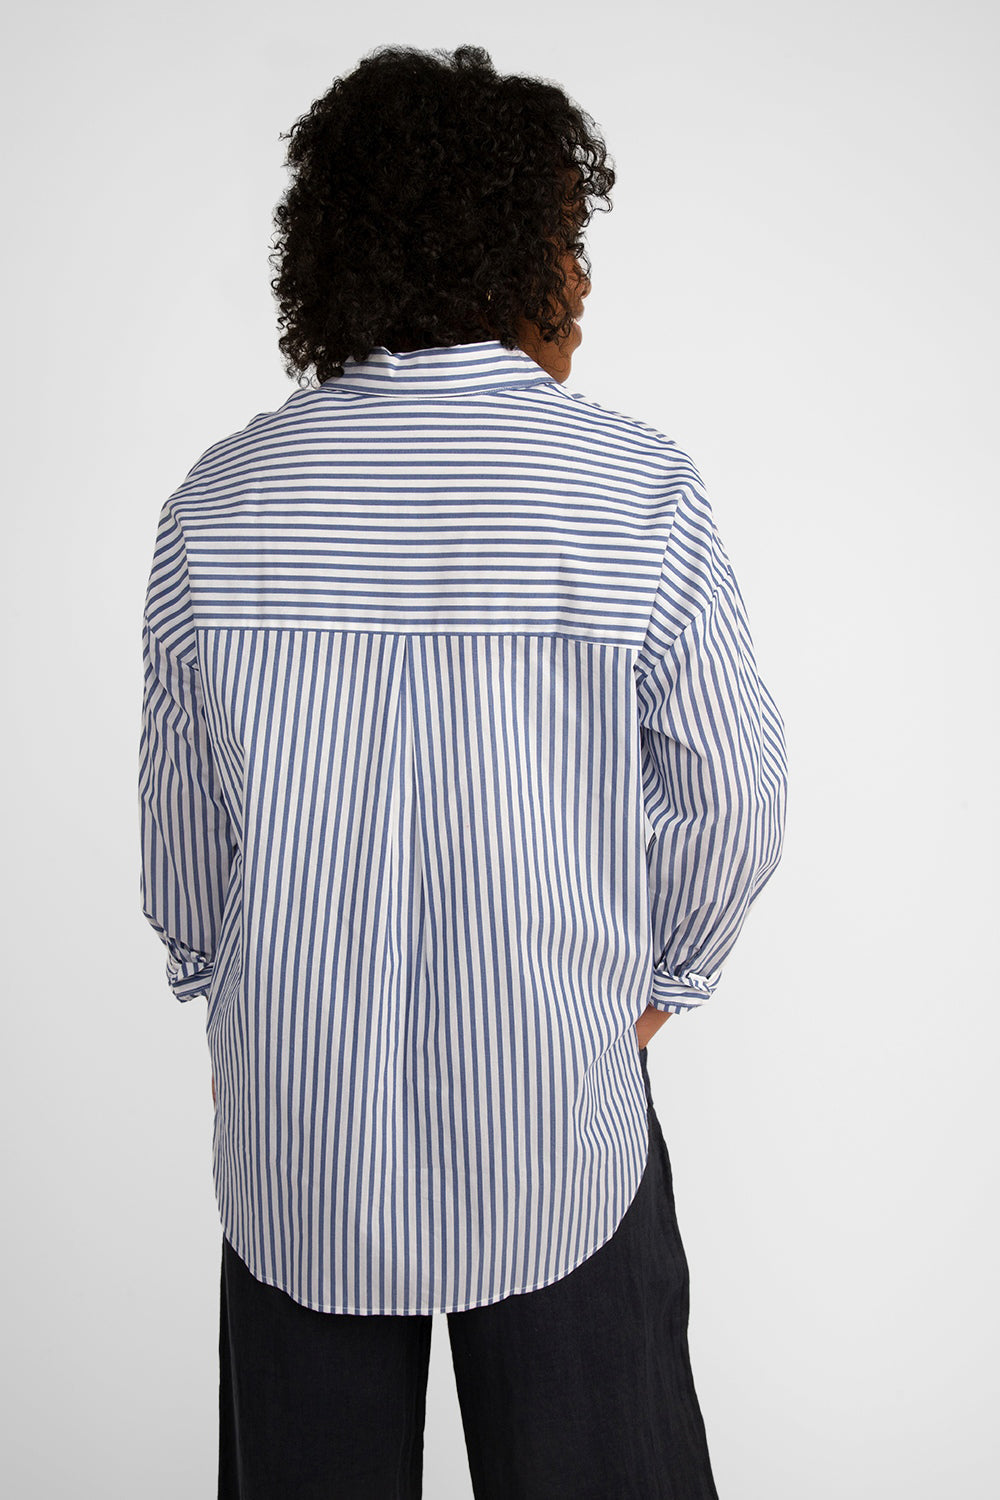 Back view of Carre Noir (6866) Women's Long Sleeve Blue & White Striped Button Up Shirt With Black Flowers along the front hem and lower half of the top